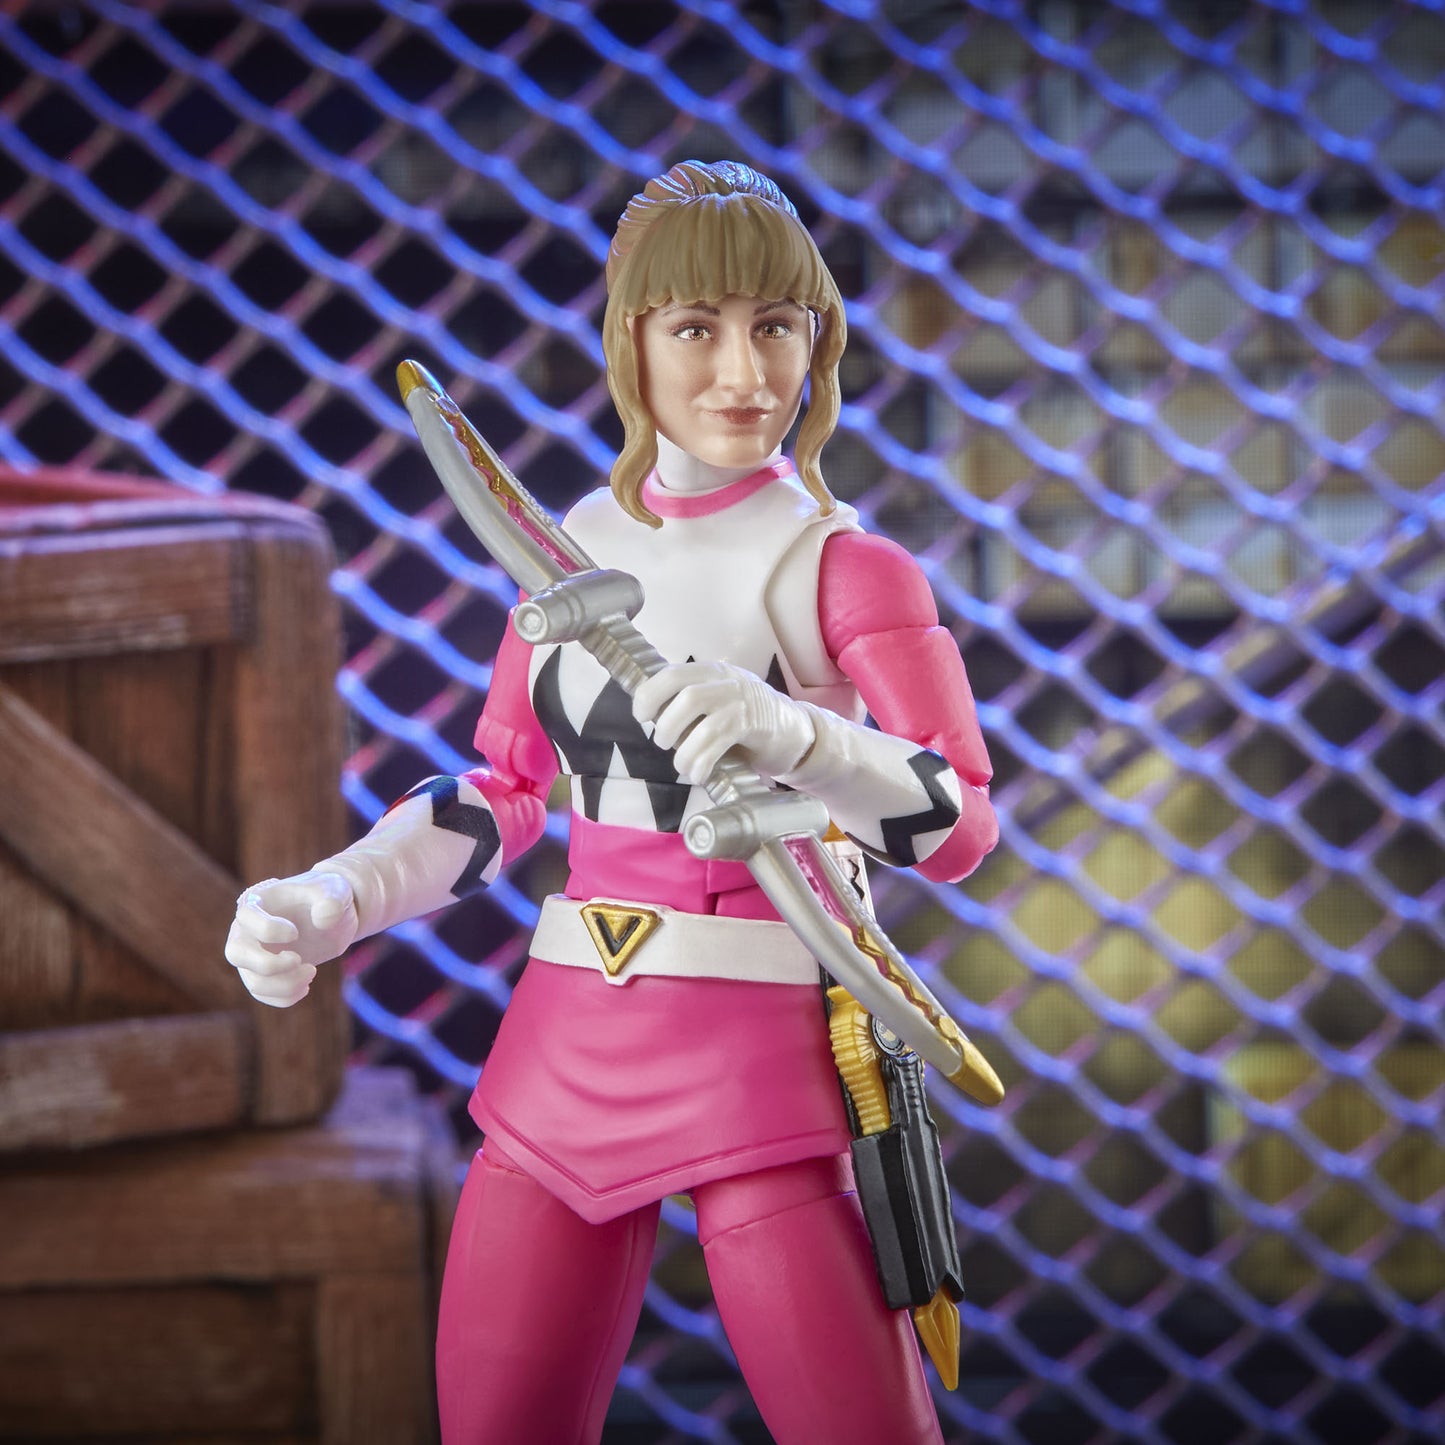 Power Rangers Lightning Collection Lost Galaxy Pink Ranger Figure Toy close up look 2nd - Heretoserveyou